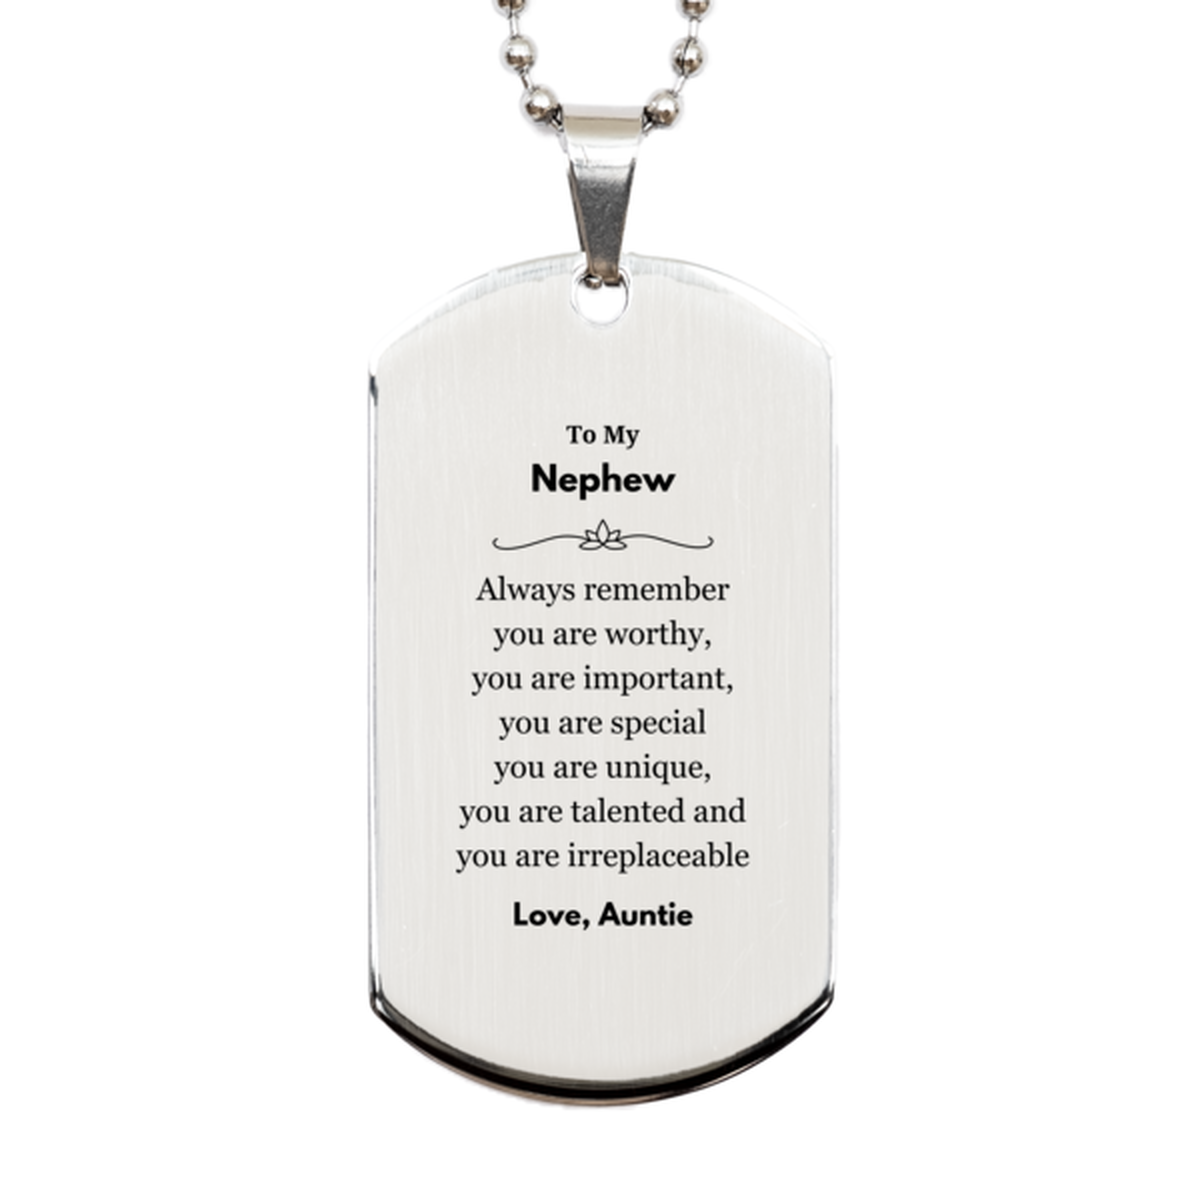 Nephew Birthday Gifts from Auntie, Inspirational Silver Dog Tag for Nephew Christmas Graduation Gifts for Nephew Always remember you are worthy, you are important. Love, Auntie